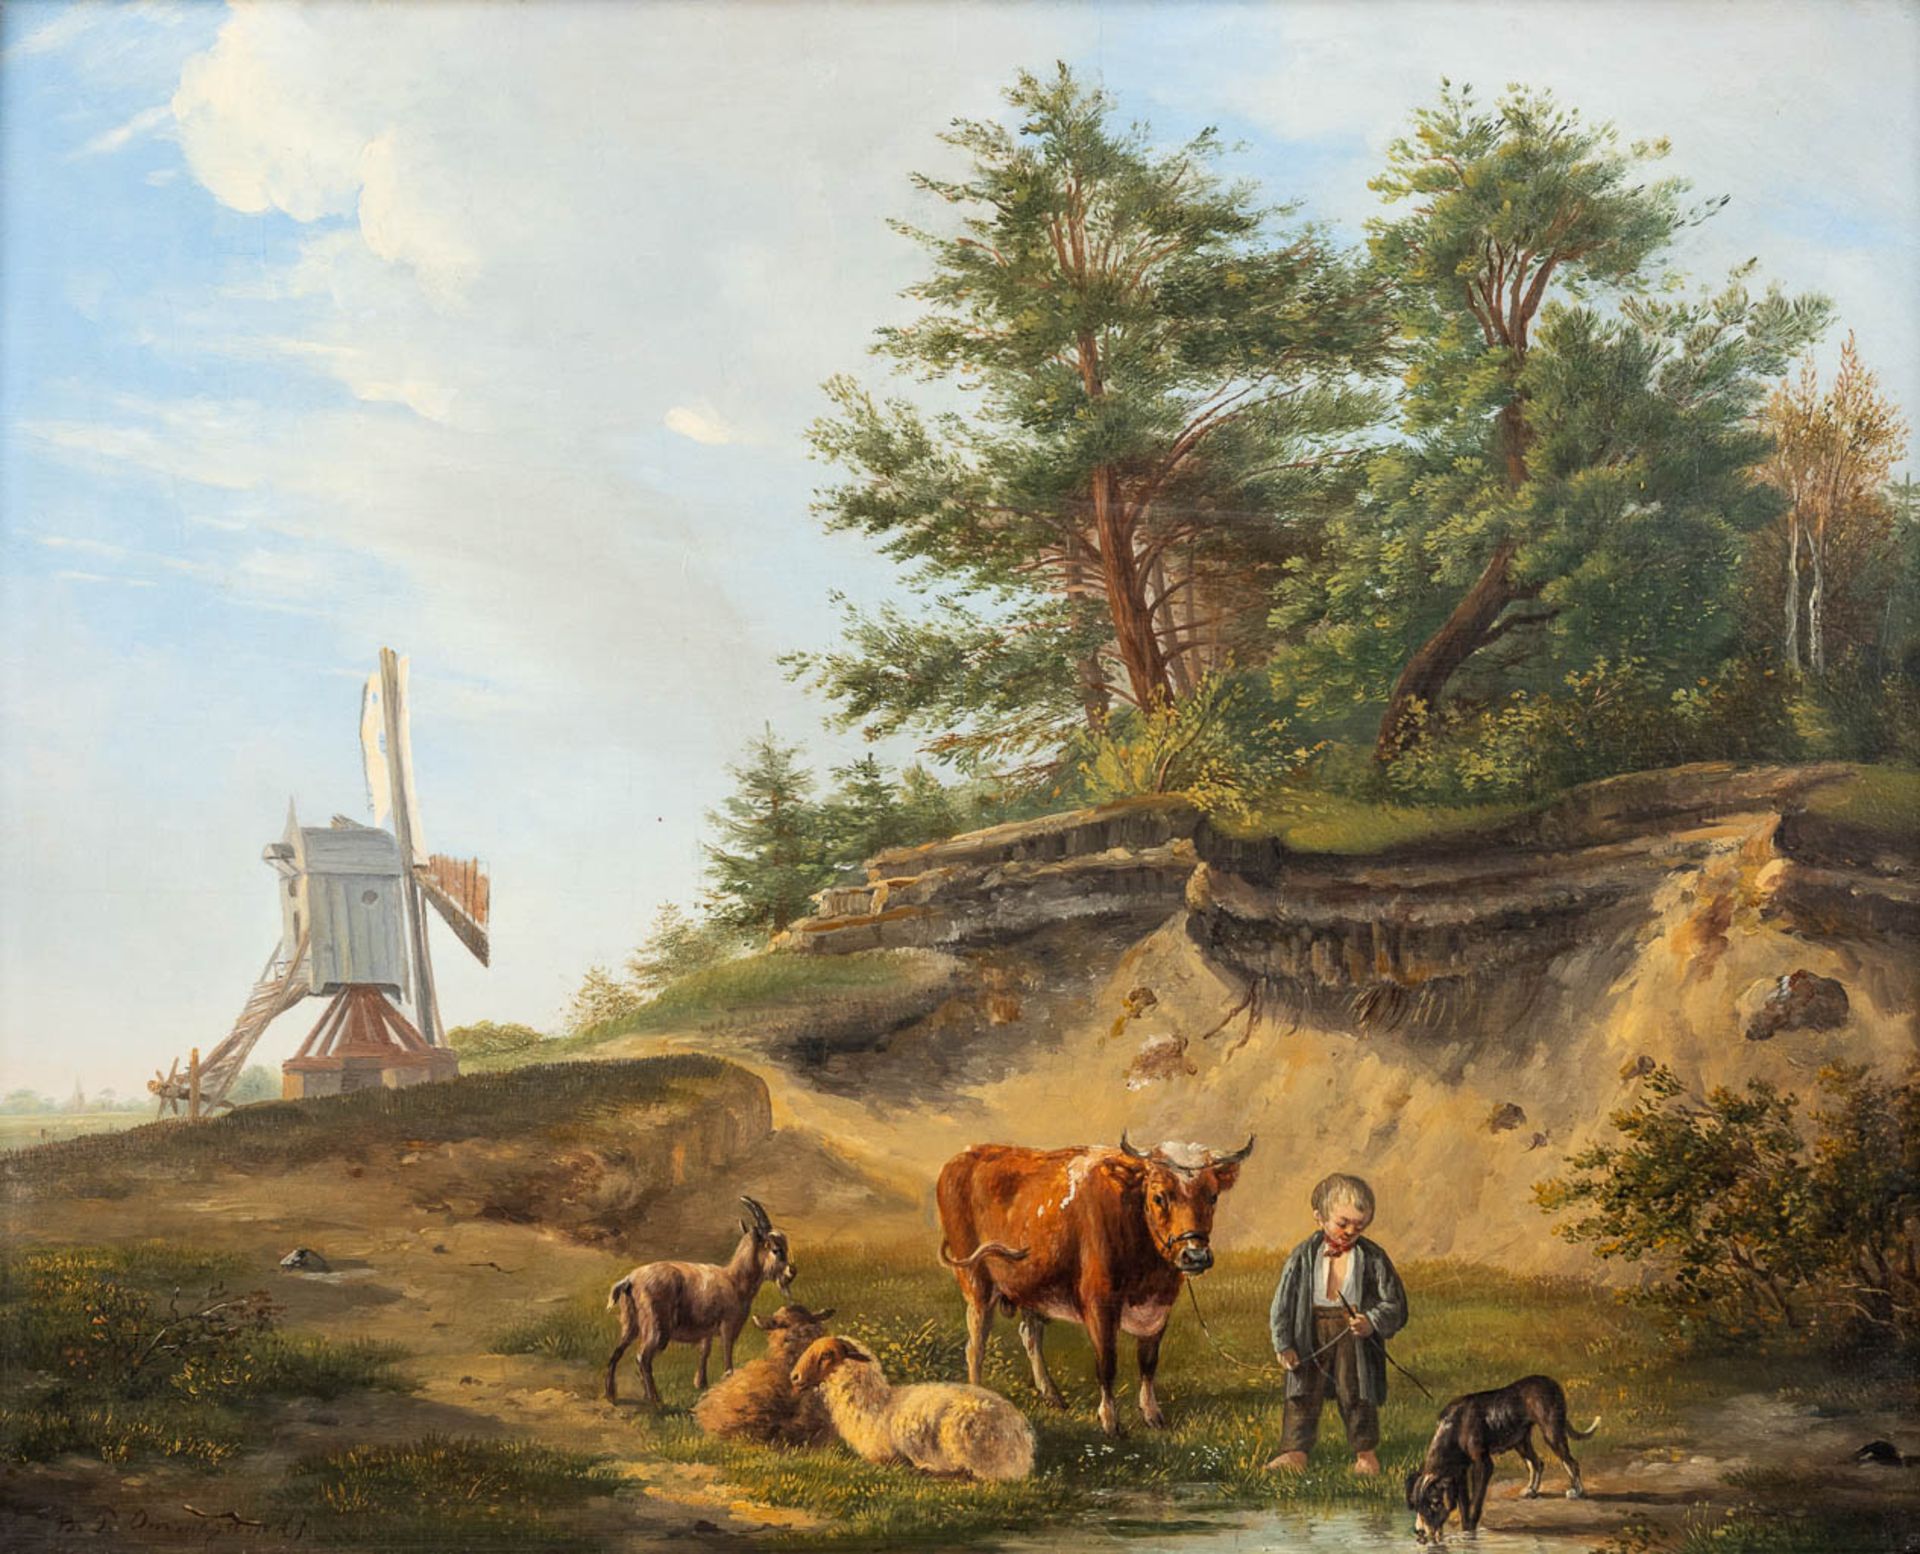 Balthazar Paul OMMEGANCK (1755-1826) 'Landscape with cattle and a windmill', oil on panel. (W:47 x